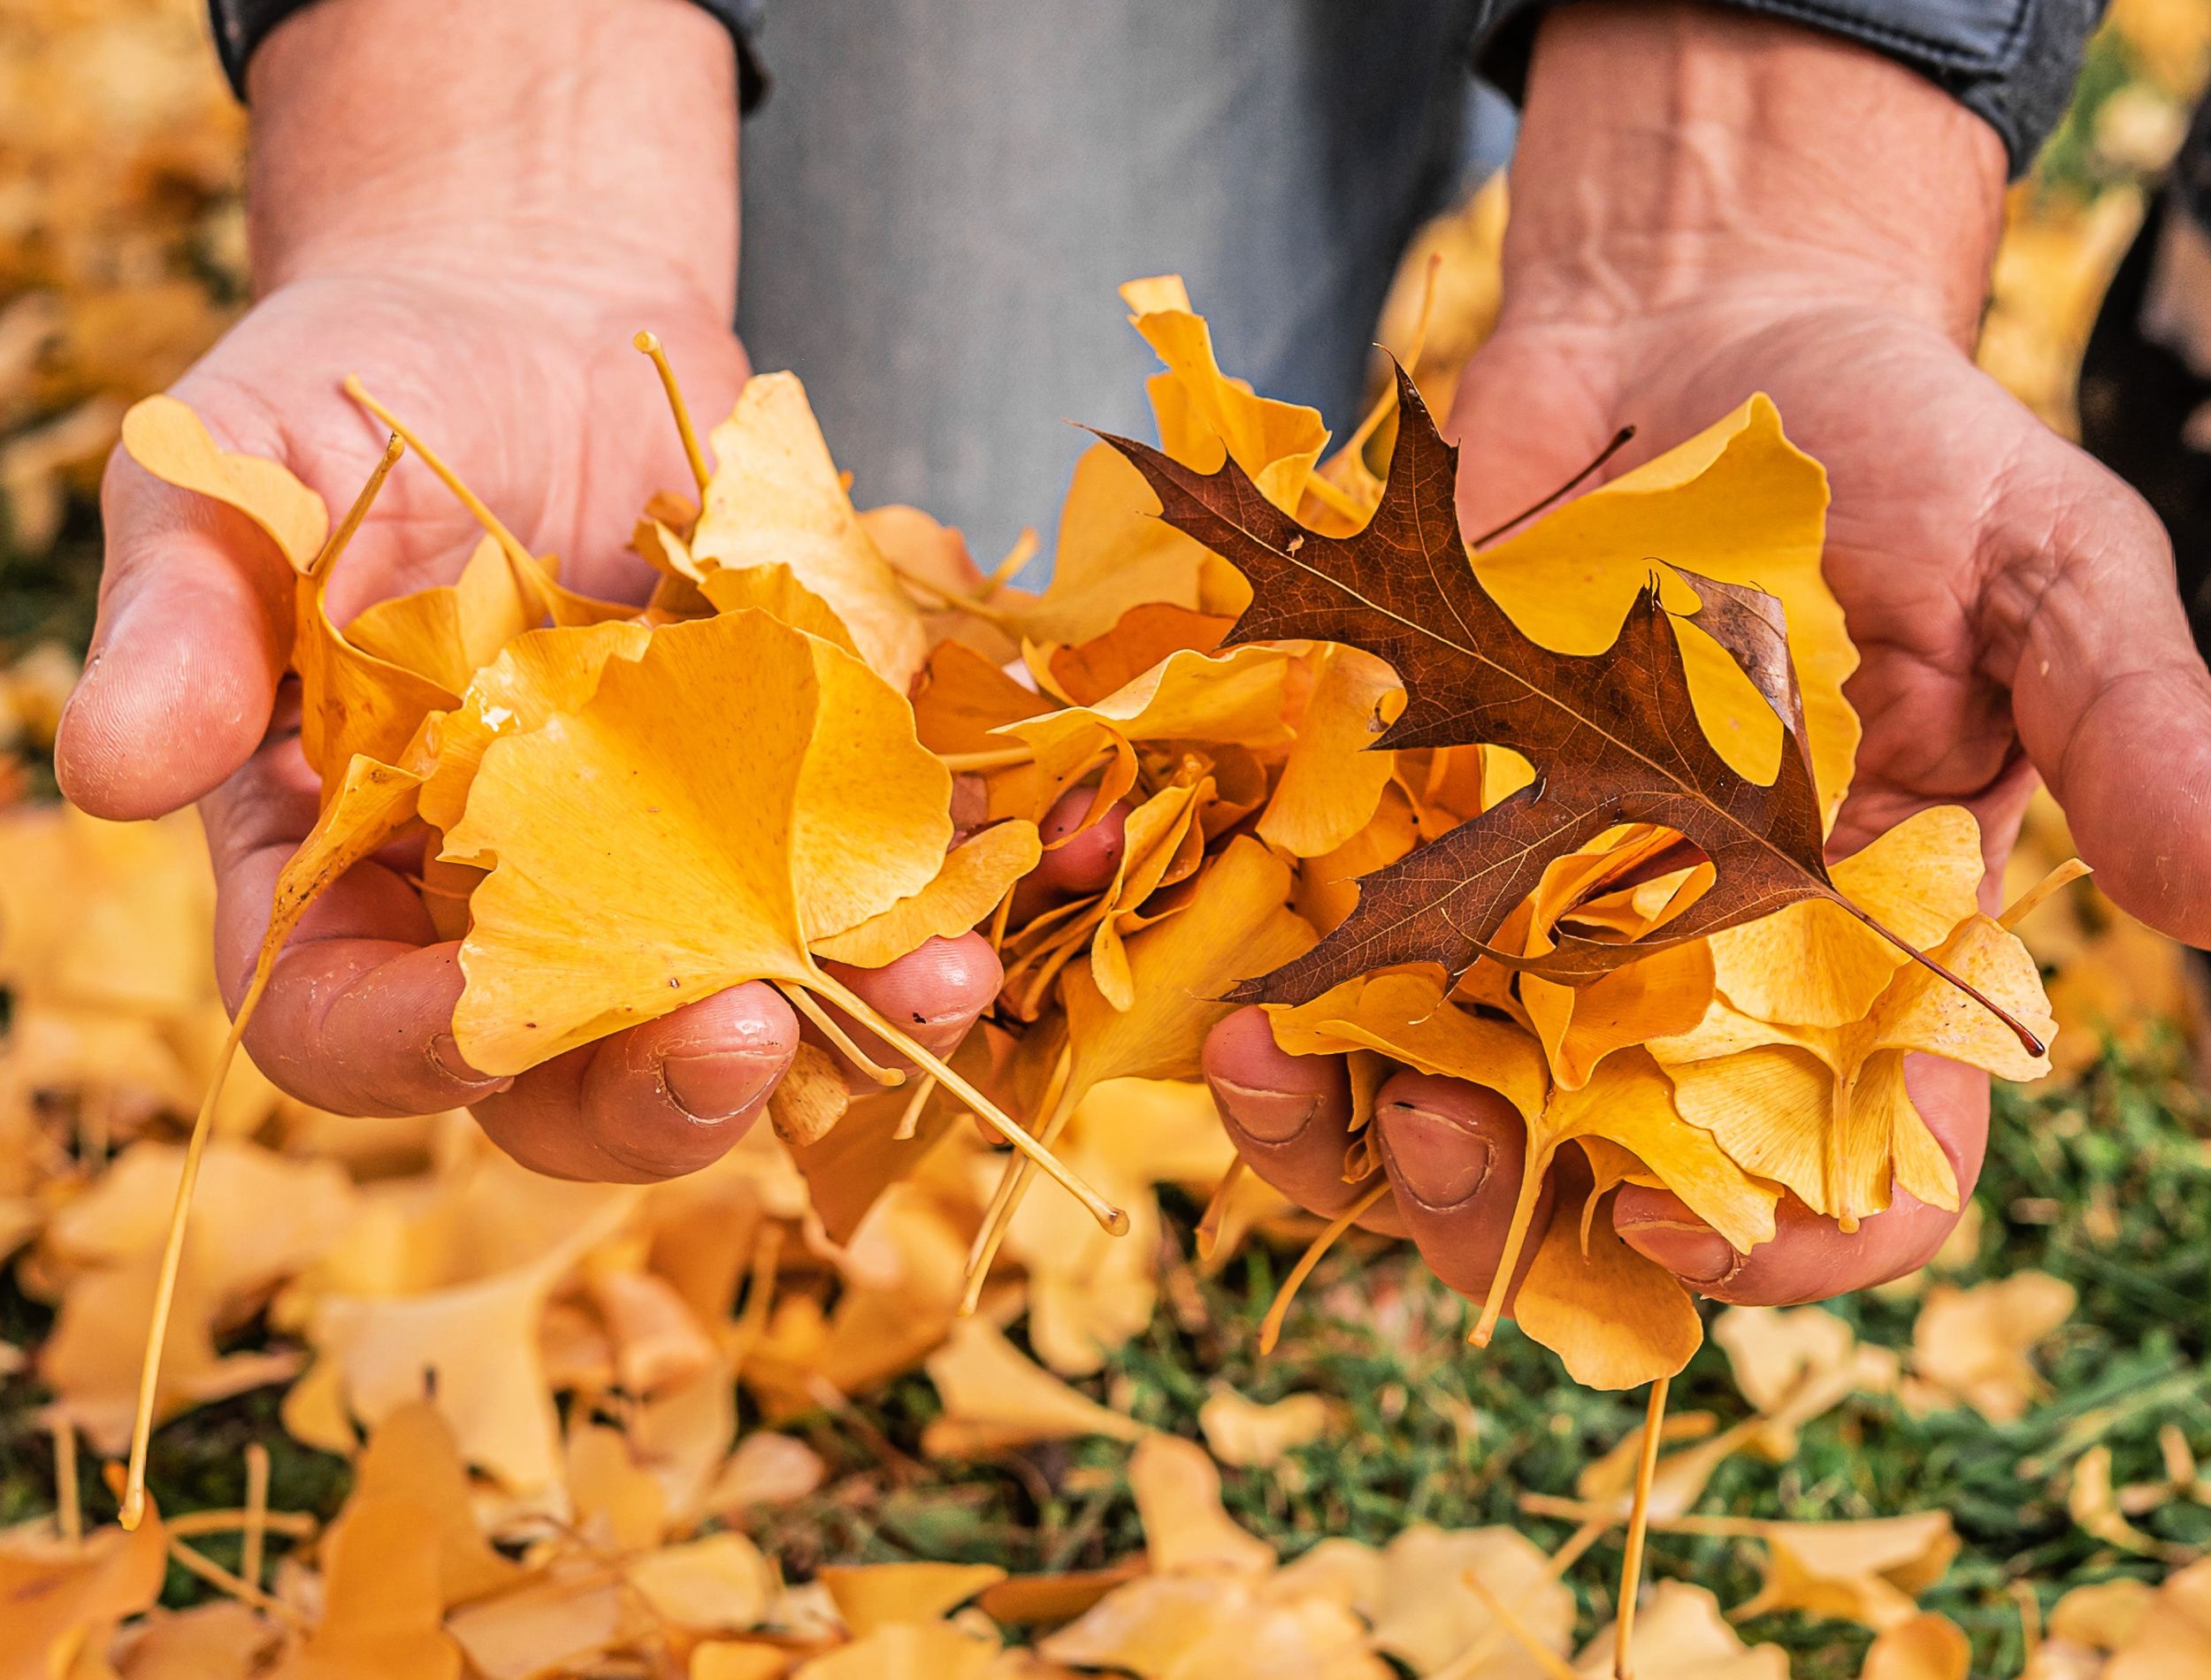 Male hands rake fallen yellow foliage from lawn with further composting and processing of organic waste in order to enrich oil. Using fallen leaves in compost. Fallen yellow foliage in hands of man